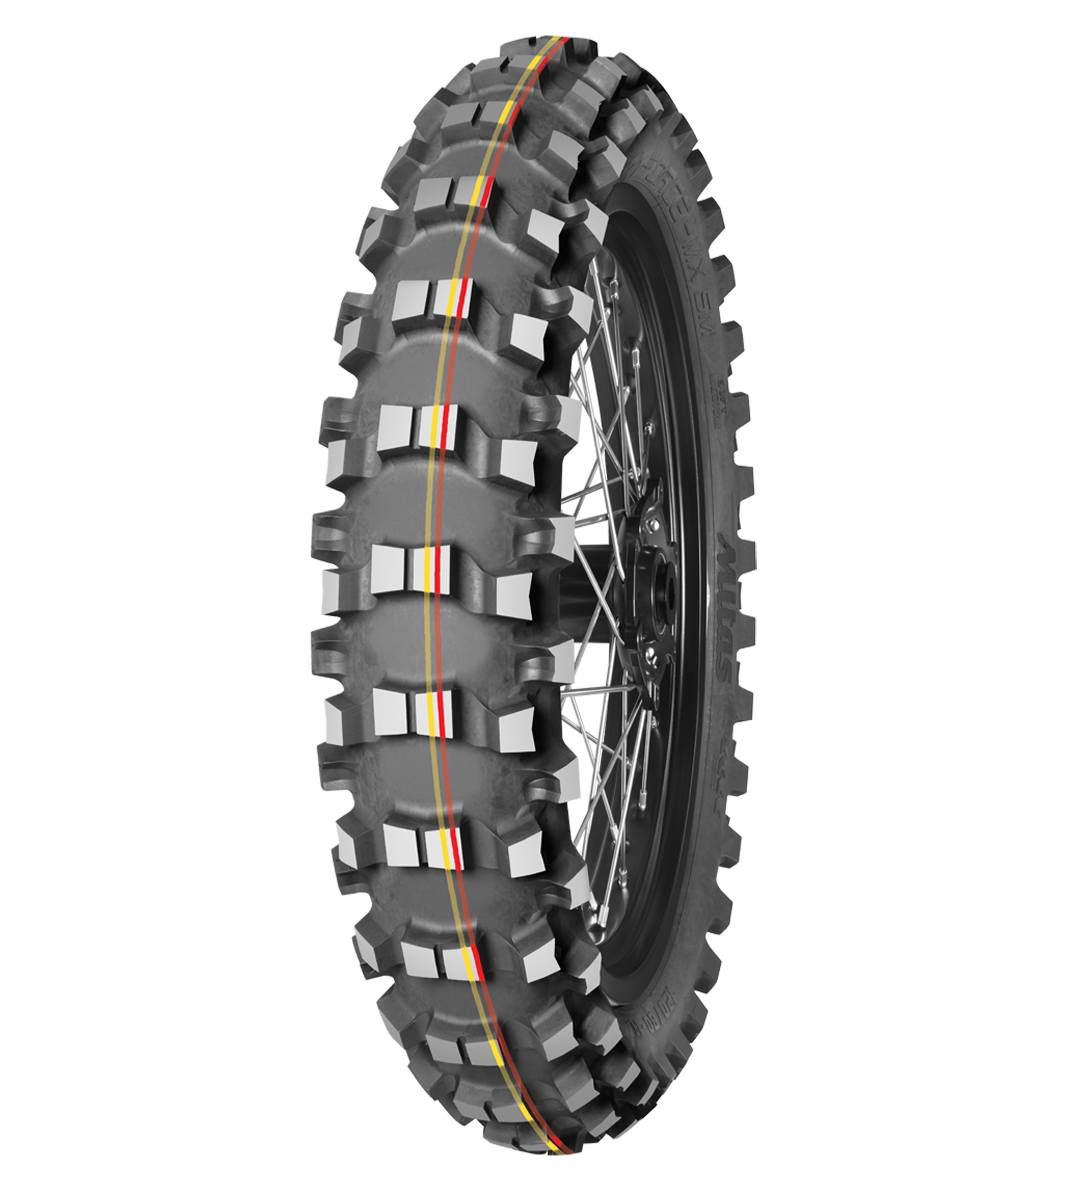 Mitas TERRA FORCE-MX SM 100/90-19 Motocross Competition Off-Road SOFT TO MEDIUM 57M Red & Yellow Tube Rear Tire, 226645, 100/90-19, 100/90-19 (r), Motocross, Motocross Competition, Off-Road, Rear, Terra Force, Terra Force-MX SM, Trail, Tires - Imported and distributed in North & South America by Lindeco Genuine Powersports - Premier Powersports Equipment and Accessories for Motorcycle Enthusiasts, Professional Riders and Dealers.